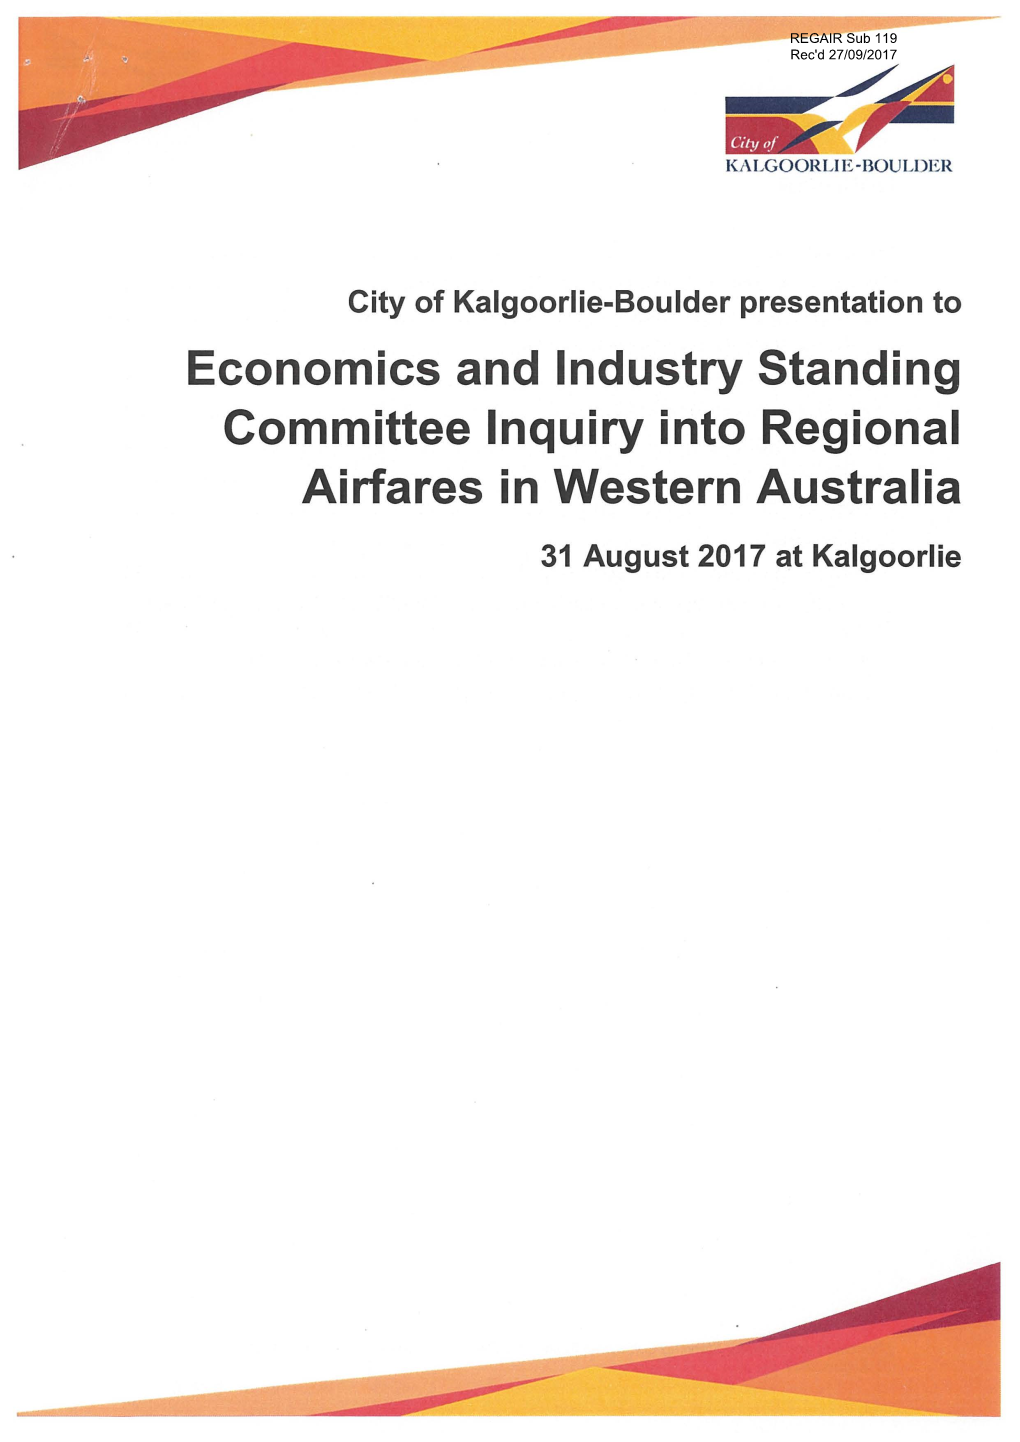 Economics and Industry Standing Committee Inquiry Into Regional Airfares in Western Australia 31 August 2017 at Kalgoorlie Contents